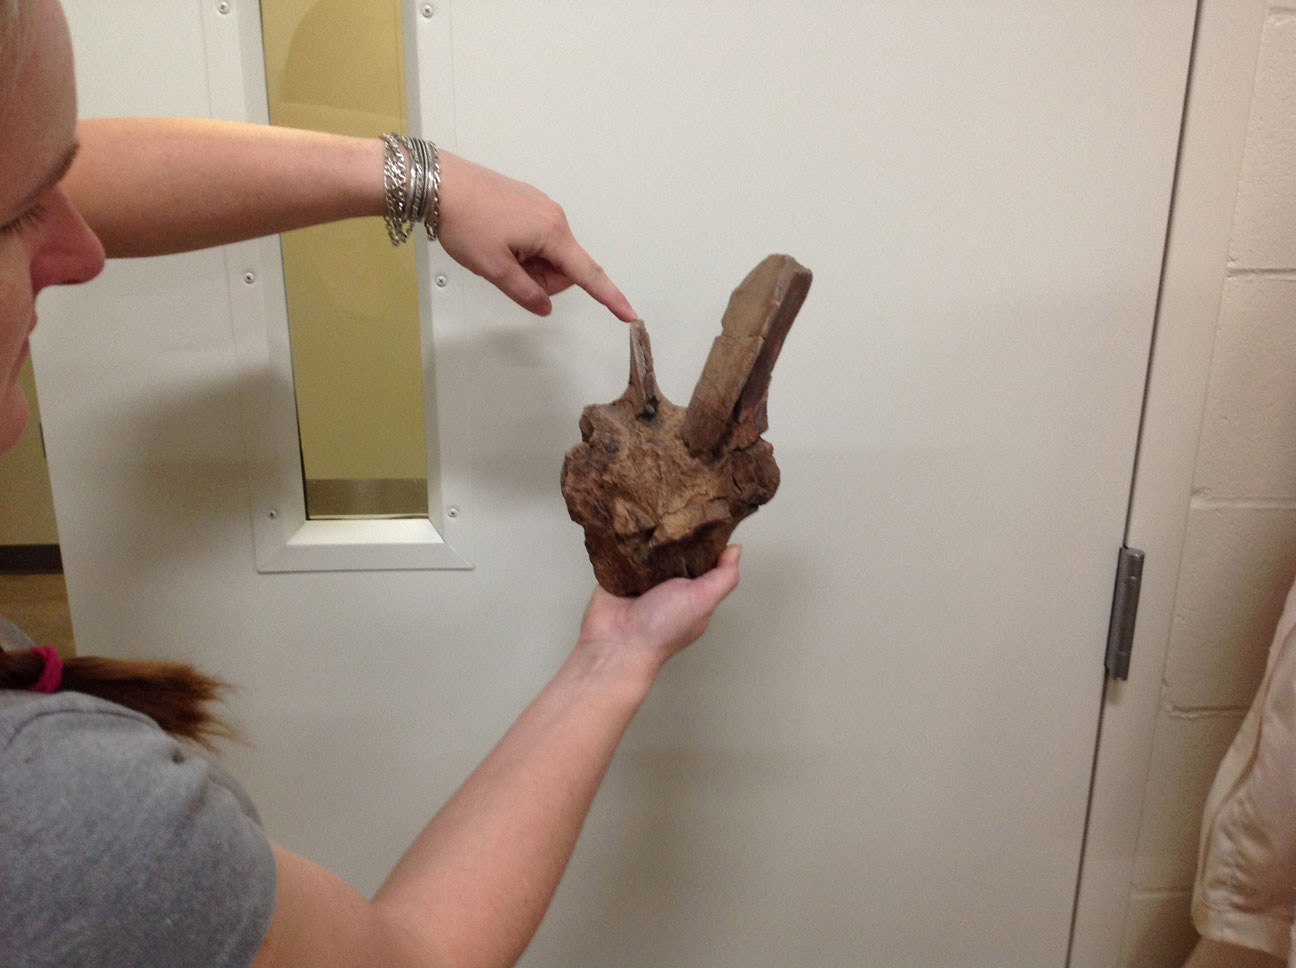 The paleontologist holds a vertebra from the Triceratops, pointing to the parts of the bone that she can use to identify these bones as Triceratops.